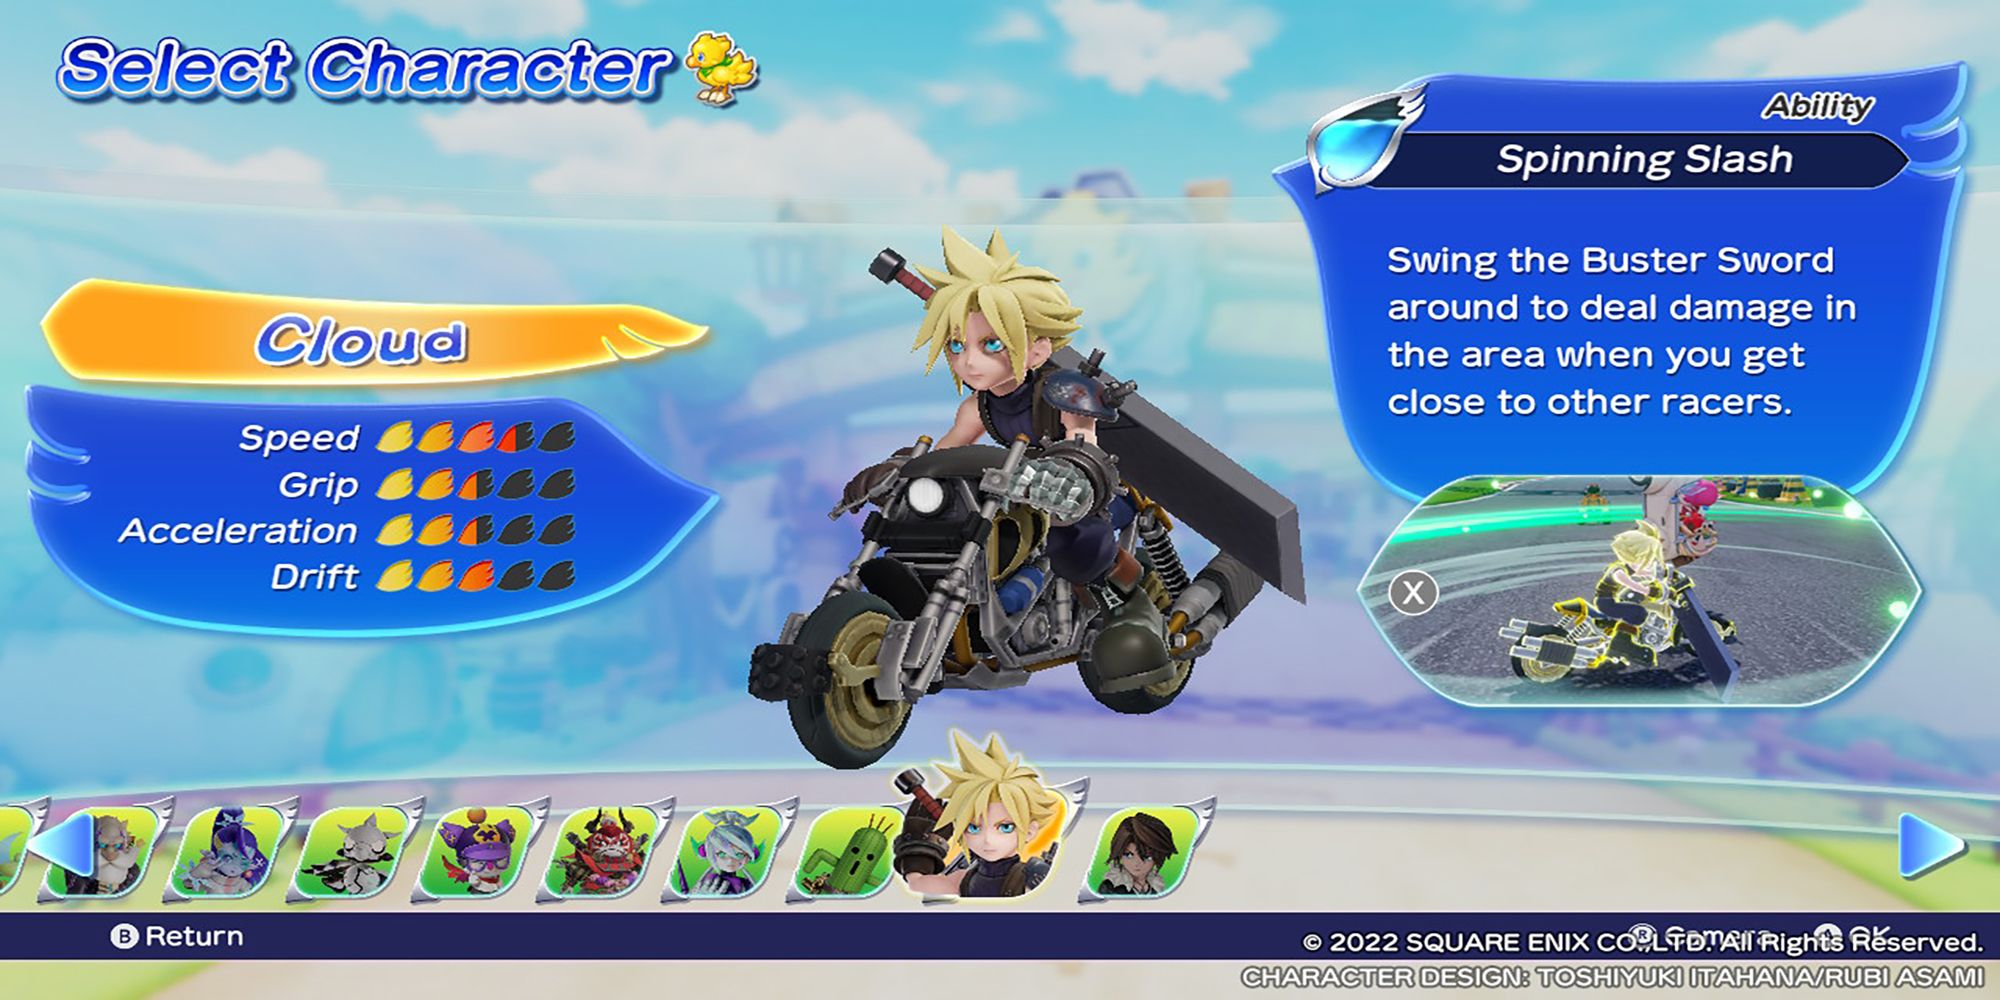 Cloud's character model, along with his stats and abilities, in the Select Character menu. Chocobo GP.